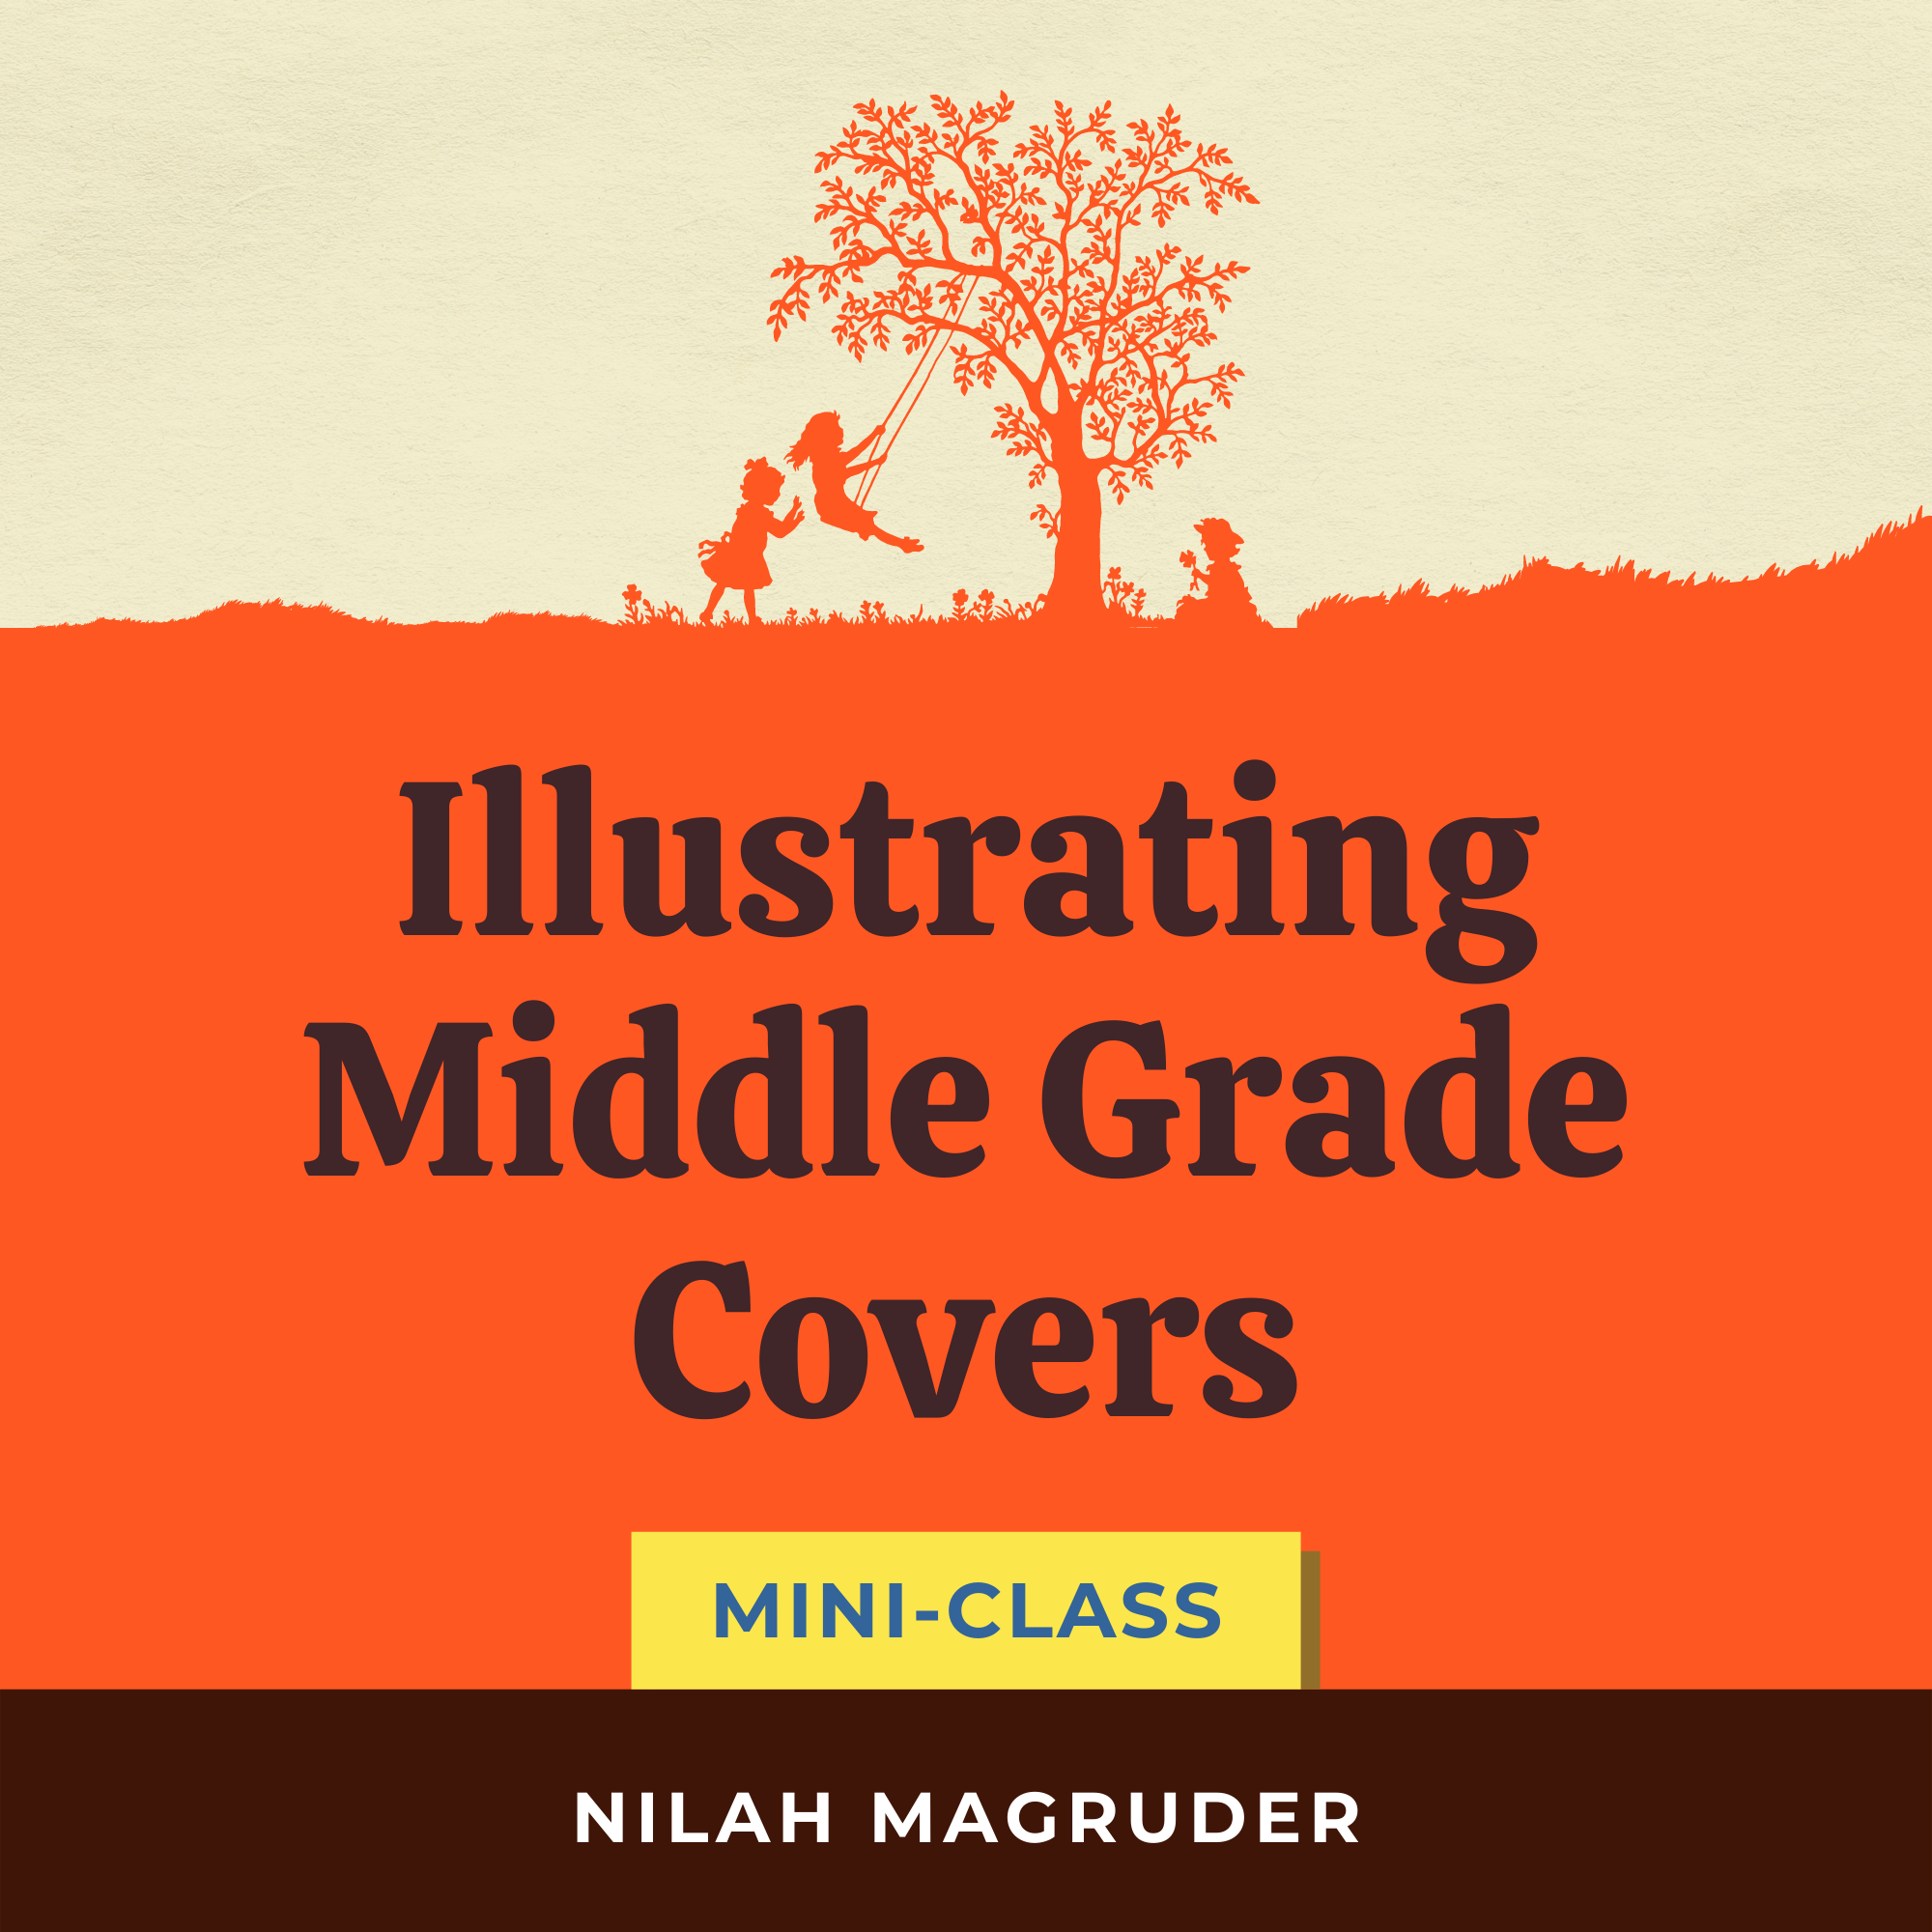 Illustrating Middle Grade Covers